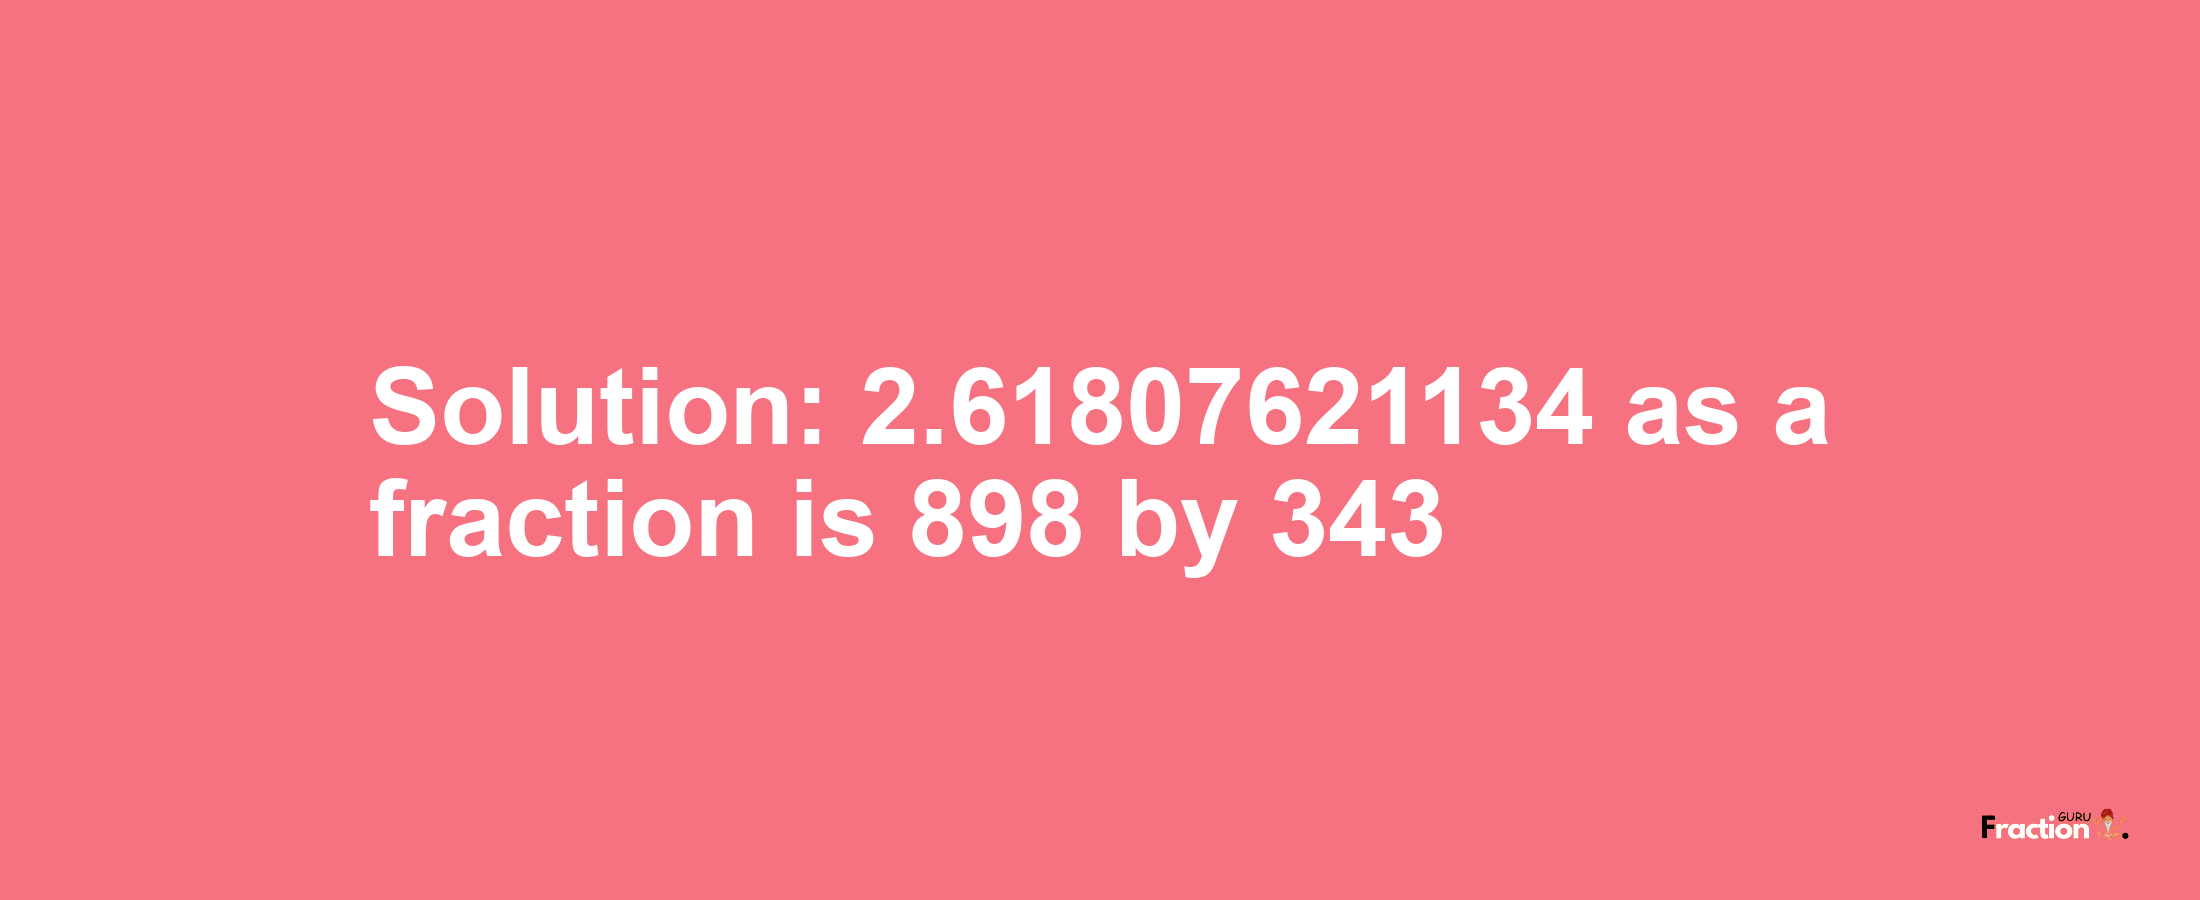 Solution:2.61807621134 as a fraction is 898/343